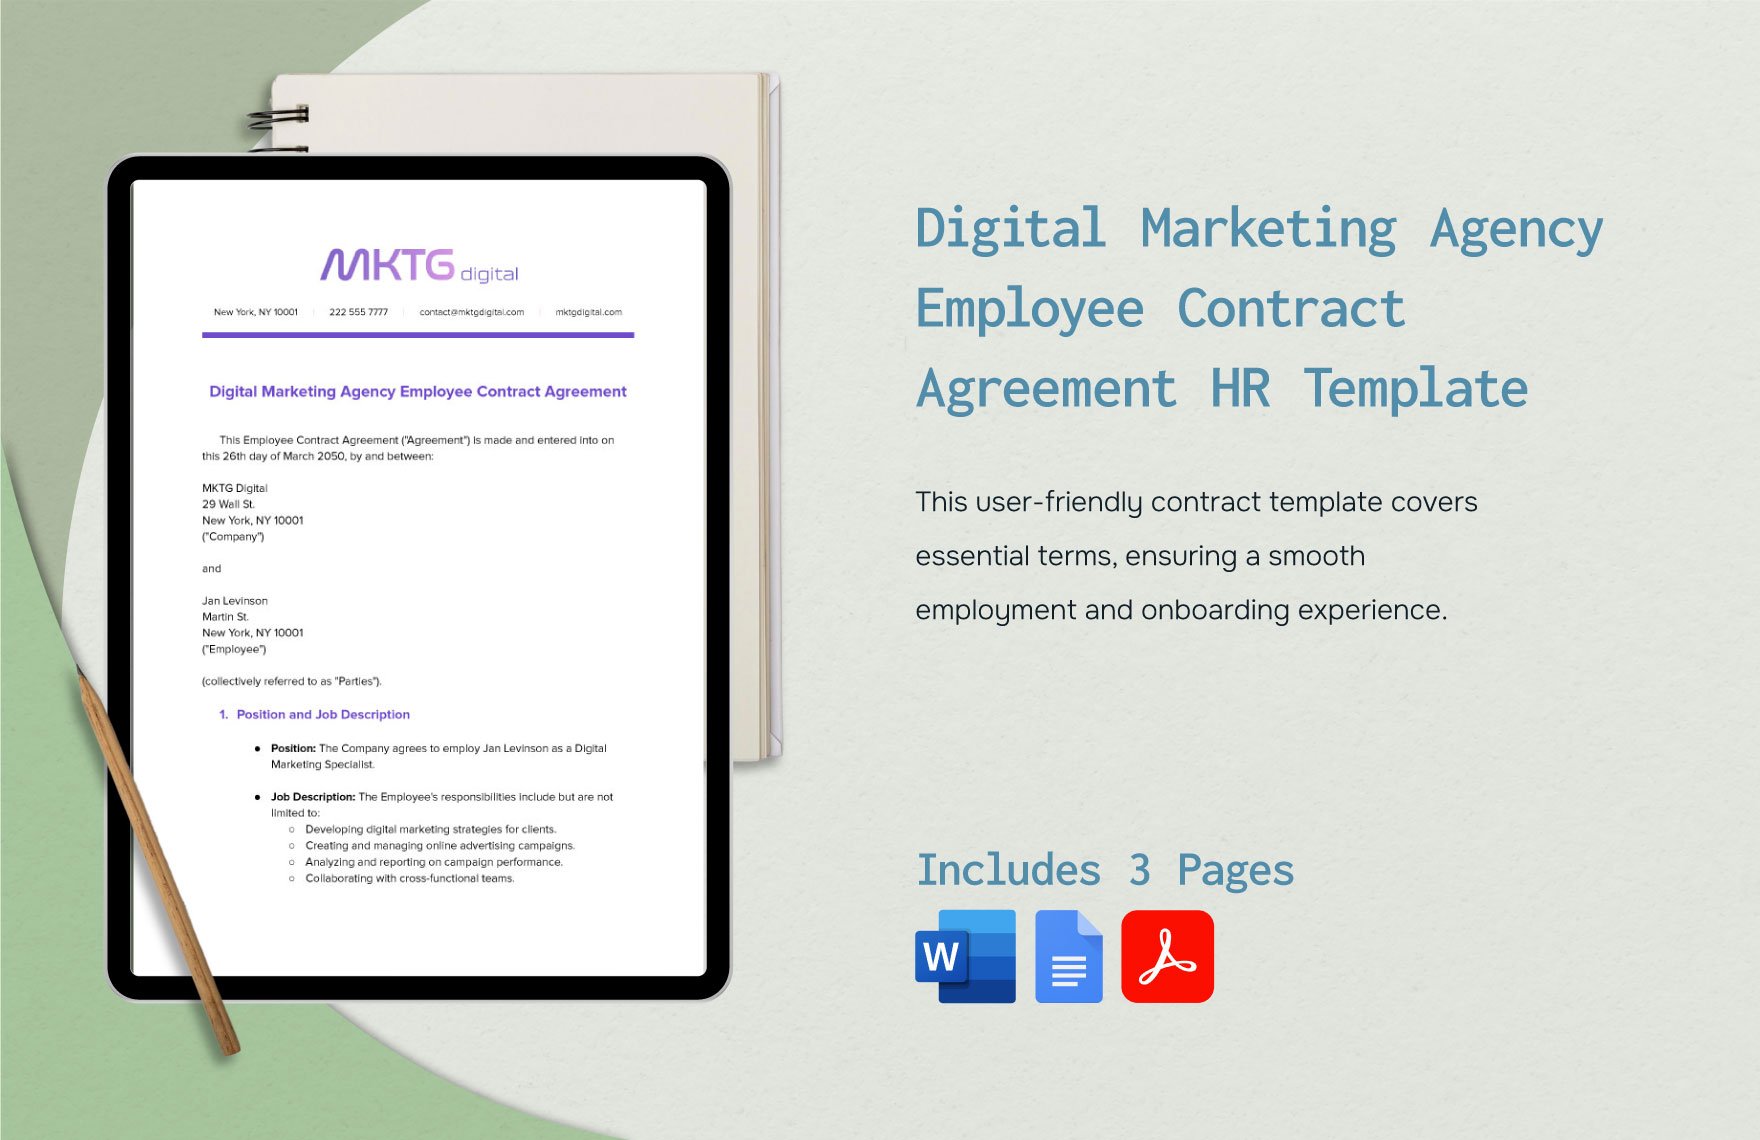 Digital Marketing Agency Employee Contract Agreement HR Template